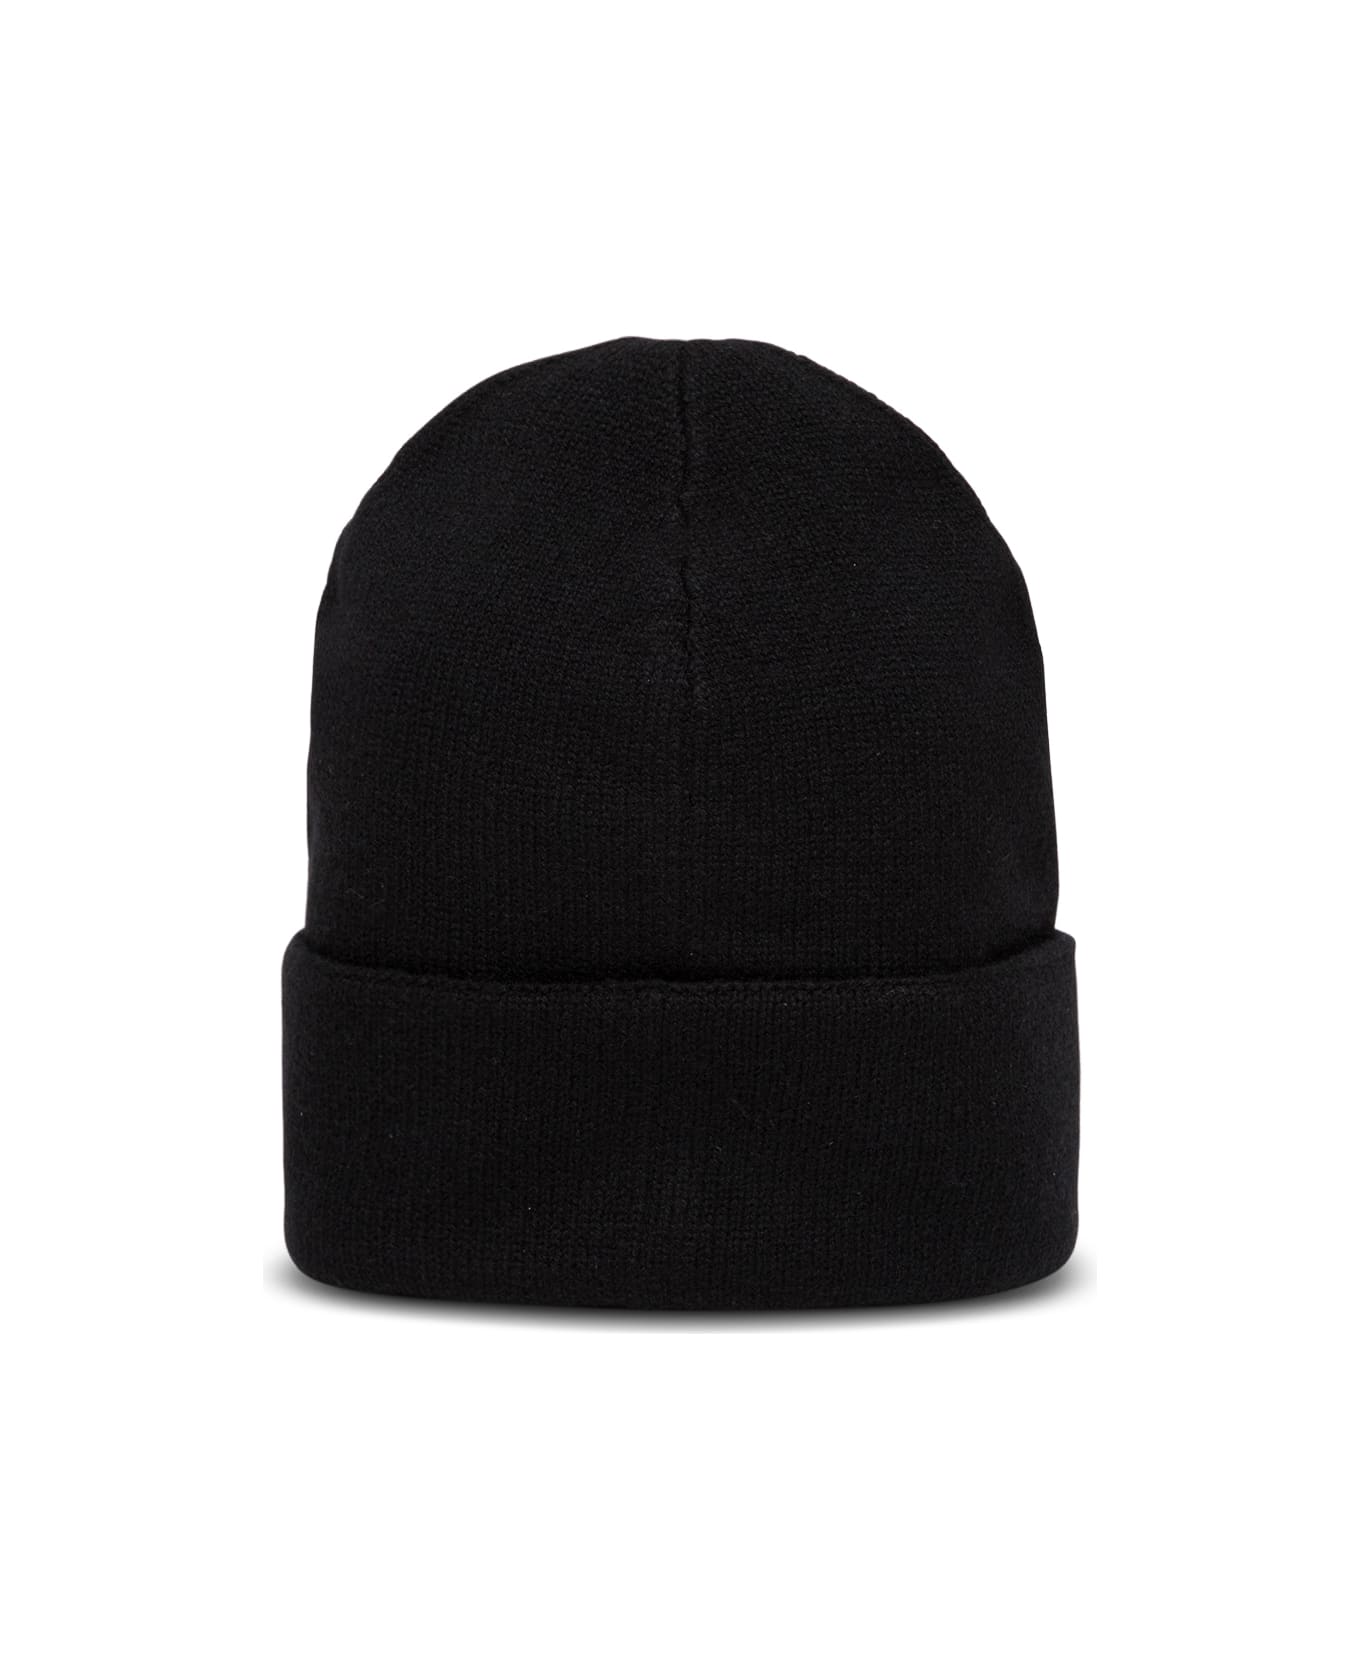 Alexander McQueen Black Wool And Cashmere Hat With Logo - Black 帽子